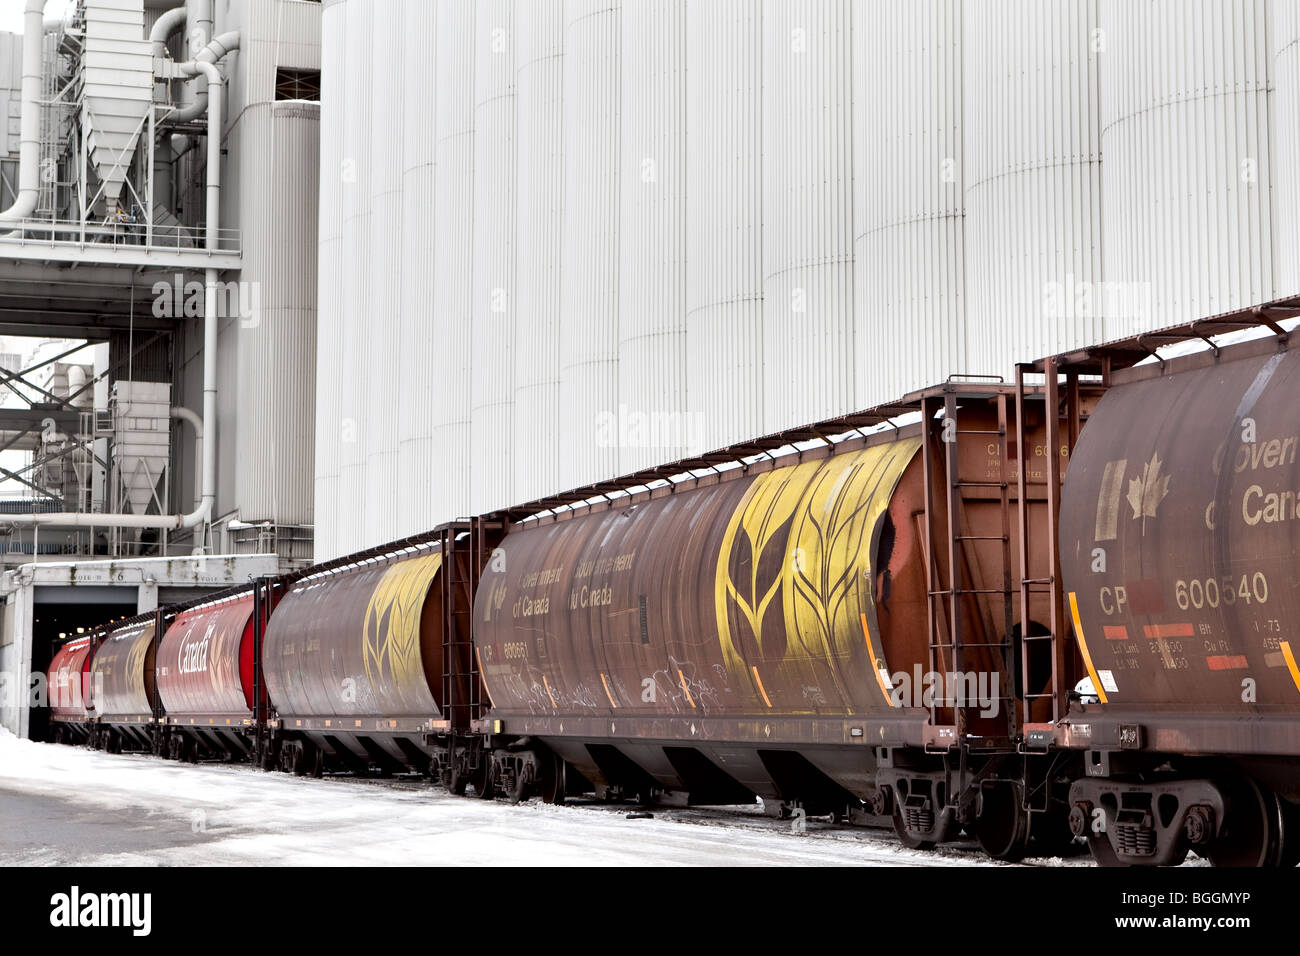 Canadian Pacific (CP) rail cars are pictured in front of the Bunge grain silos in quebec city Stock Photo